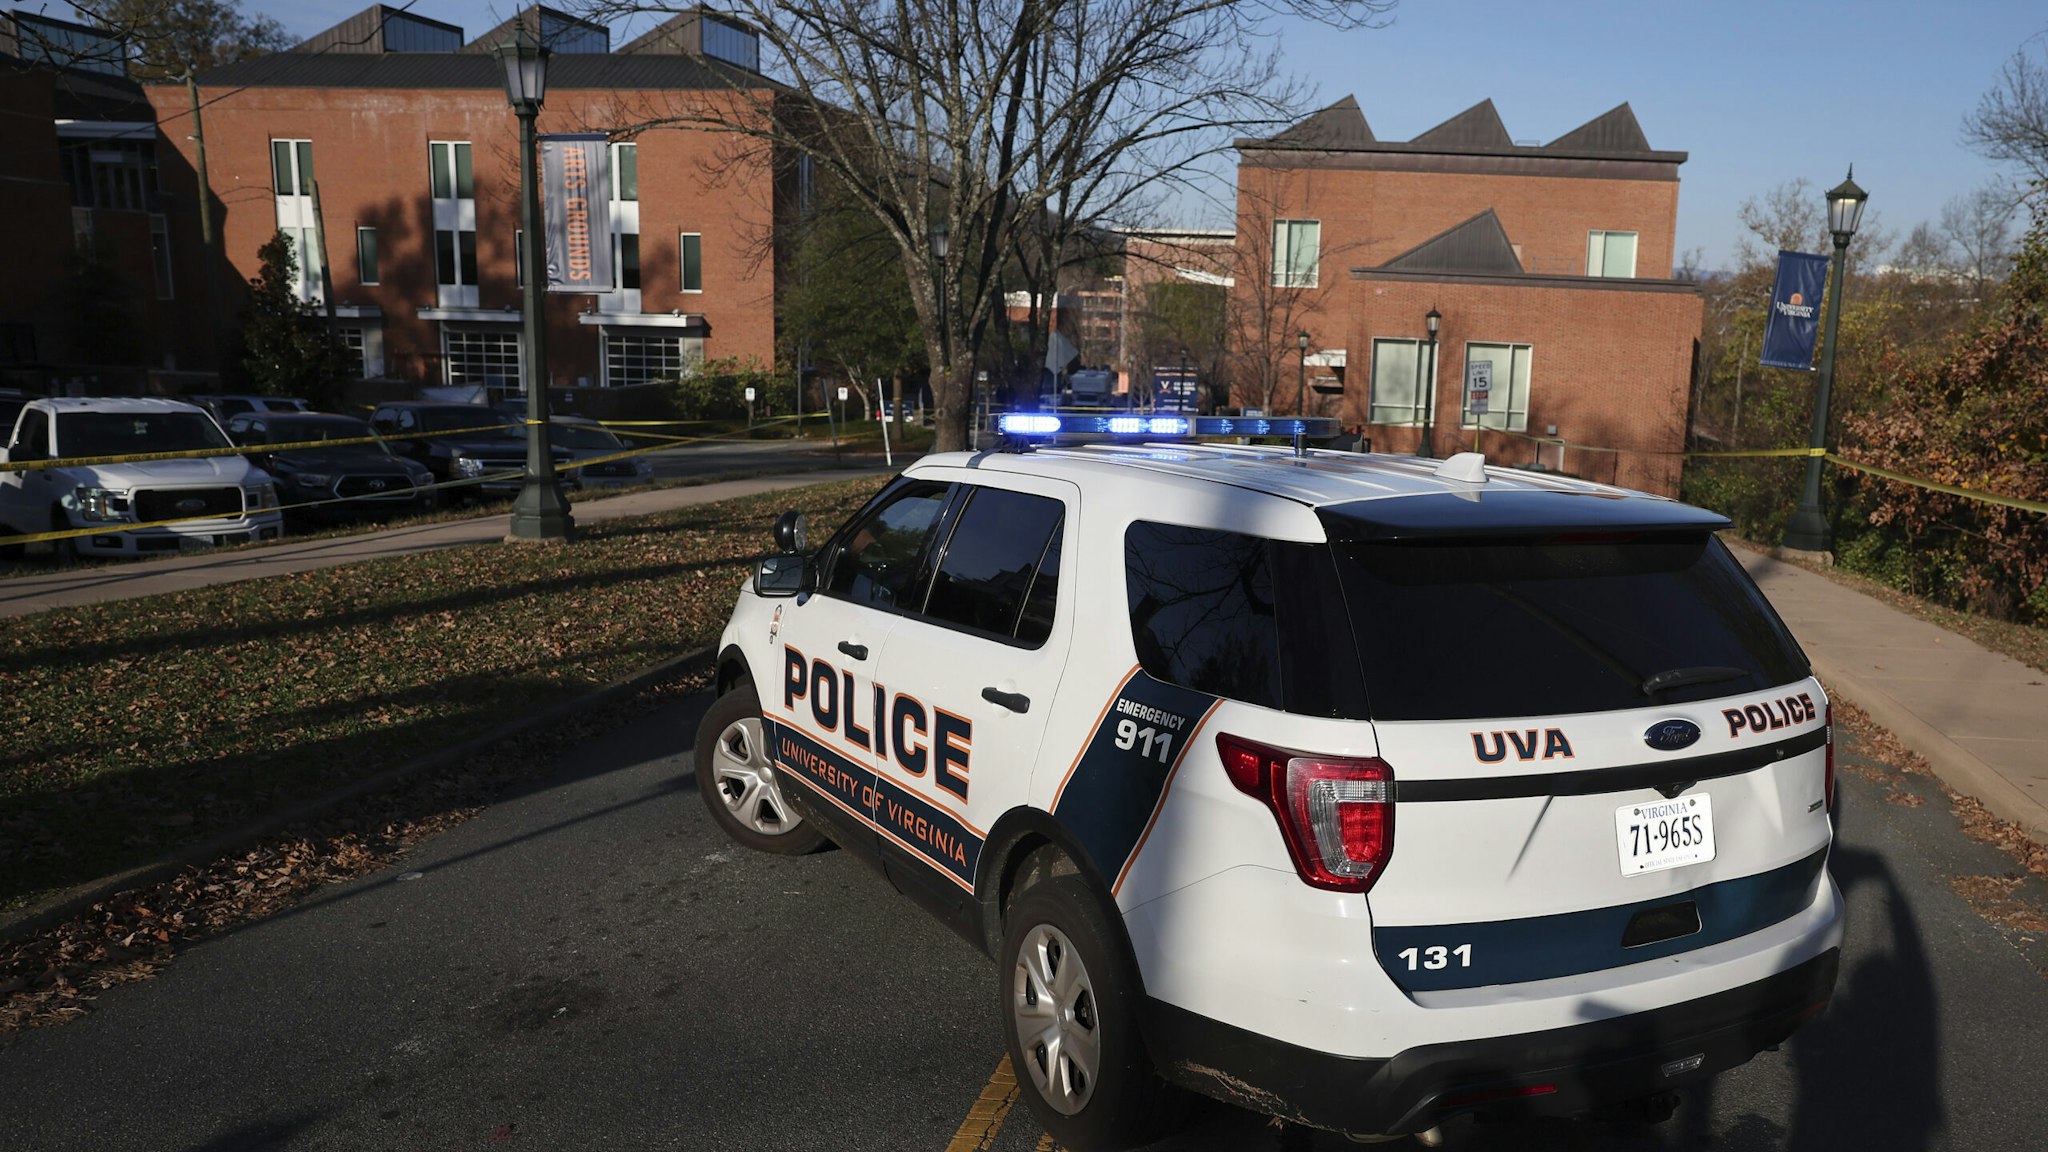 The slain players were identified by school President Jim Ryan as Devin Chandler, Lavel Davis Jr., both wide receivers, and D'Sean Perry, a linebacker and defensive end. Two other students were injured. The shooting prompted a lockdown on the school’s Charlottesville campus while police hunted the suspect throughout the night.